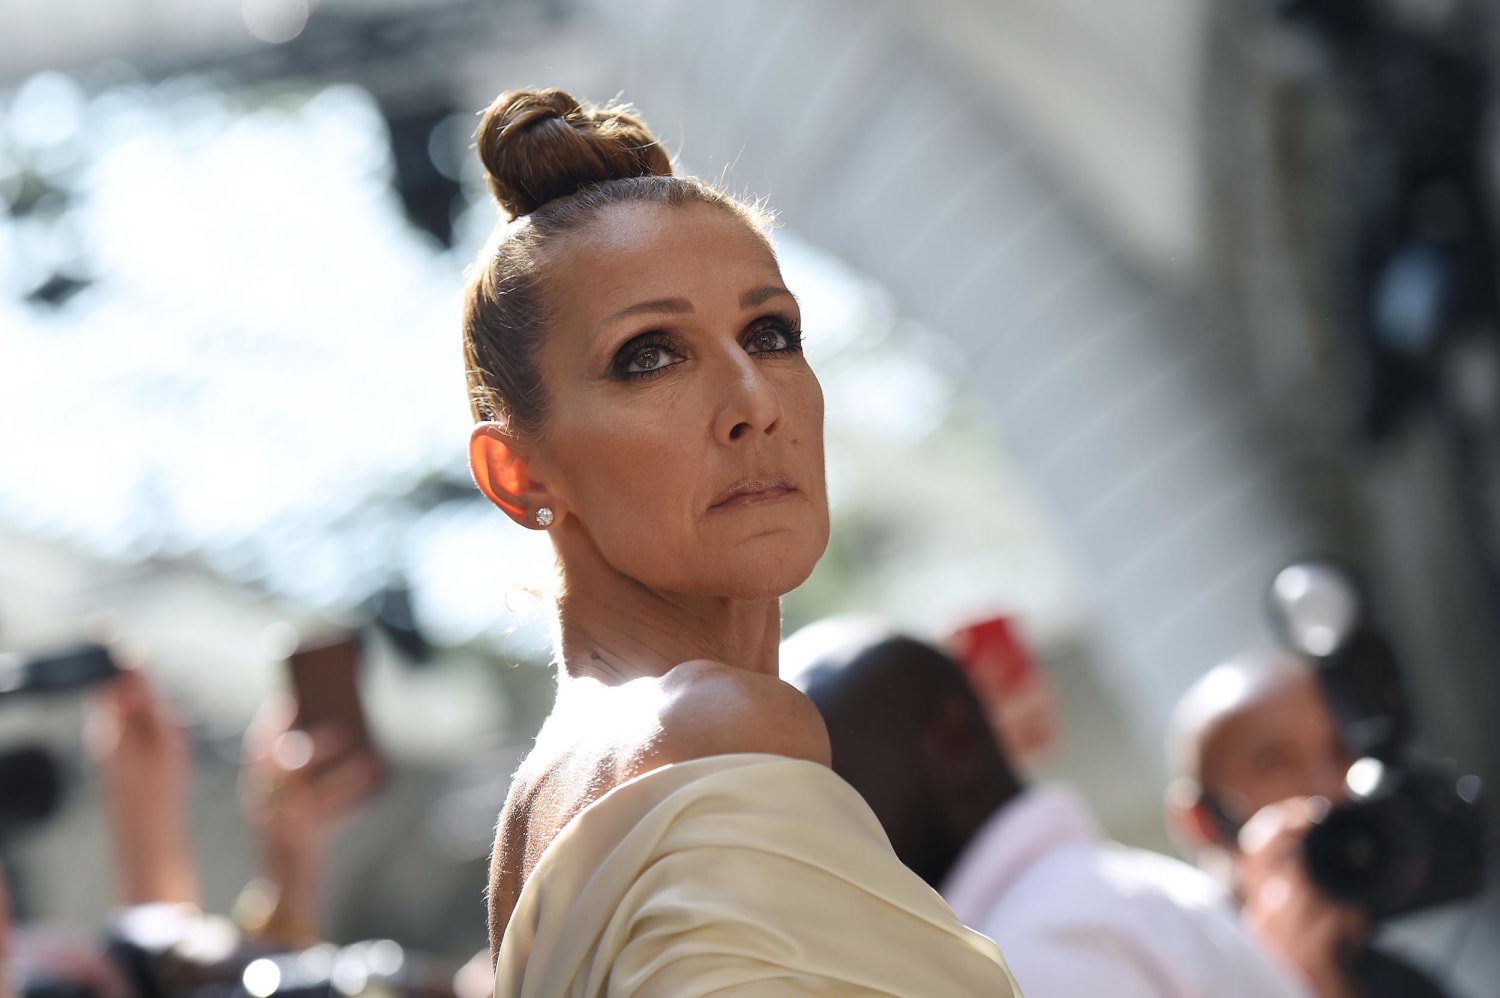 Celine Dion’s sister confirms that the singer “no longer controls her muscles”